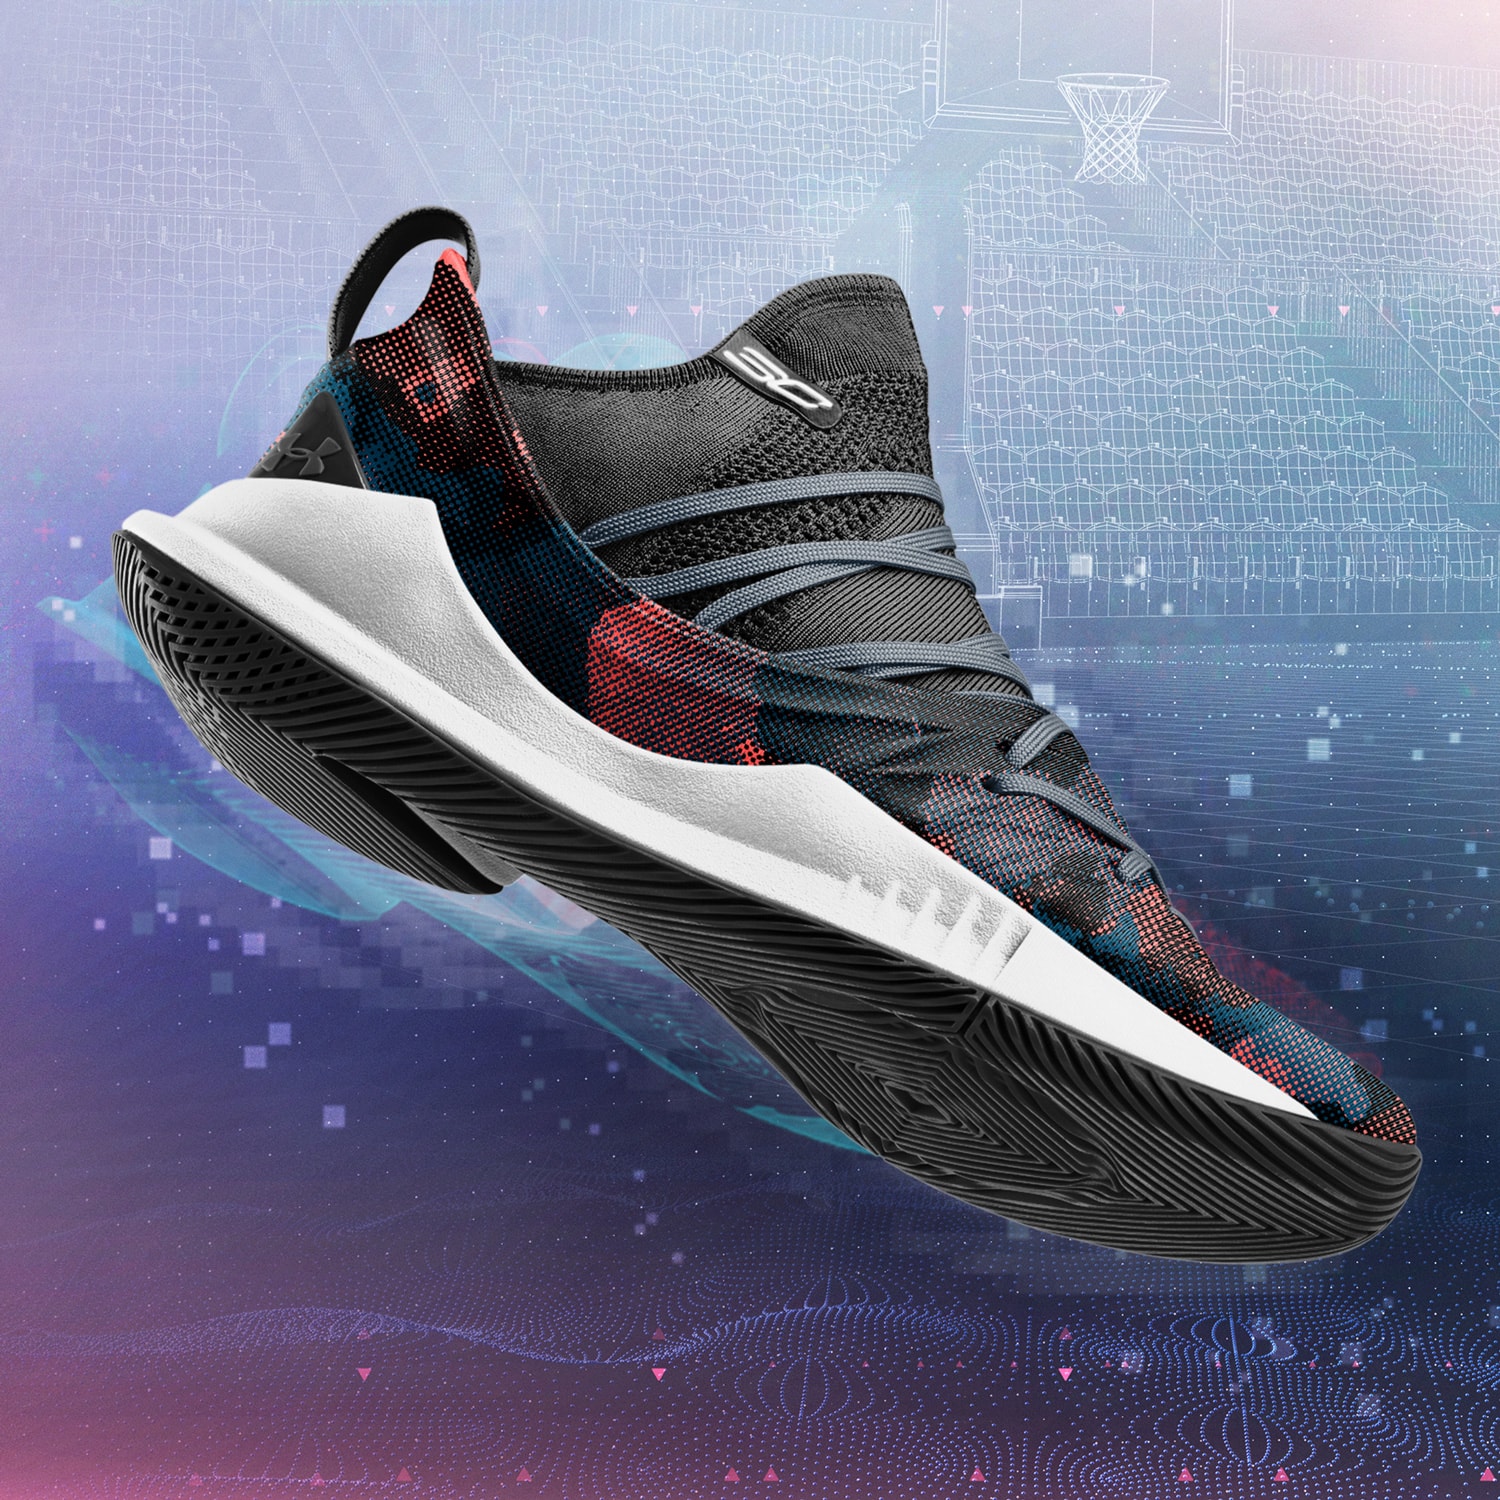 Under Armour Curry 5 ICON Footwear Customization